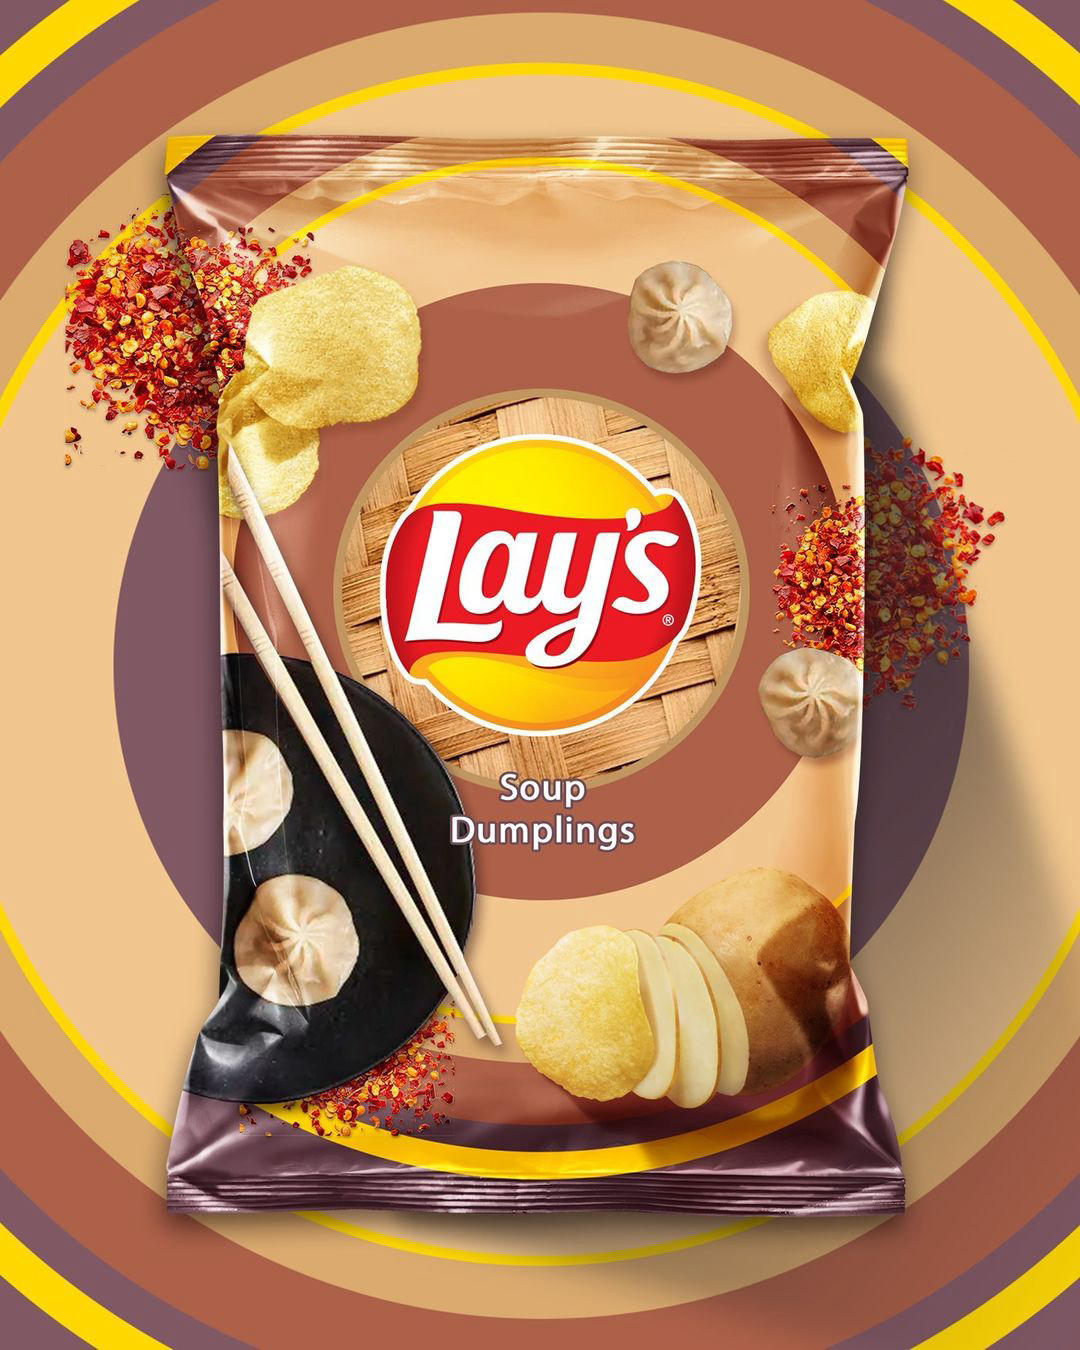 Our mouths are watering for this fake flavor